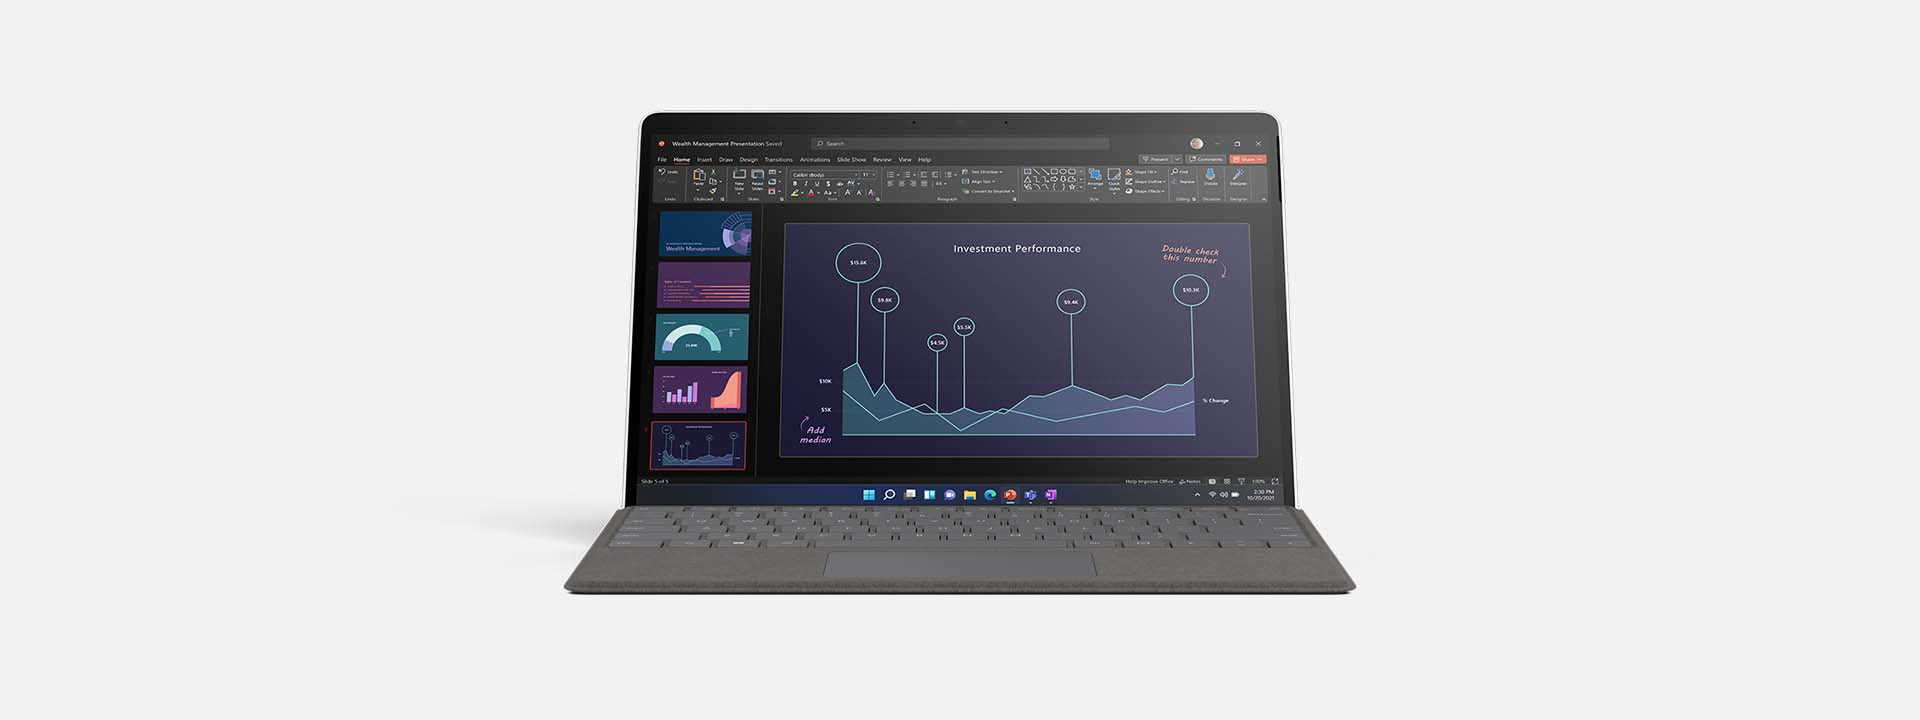 Render of Surface Pro X in Laptop Mode